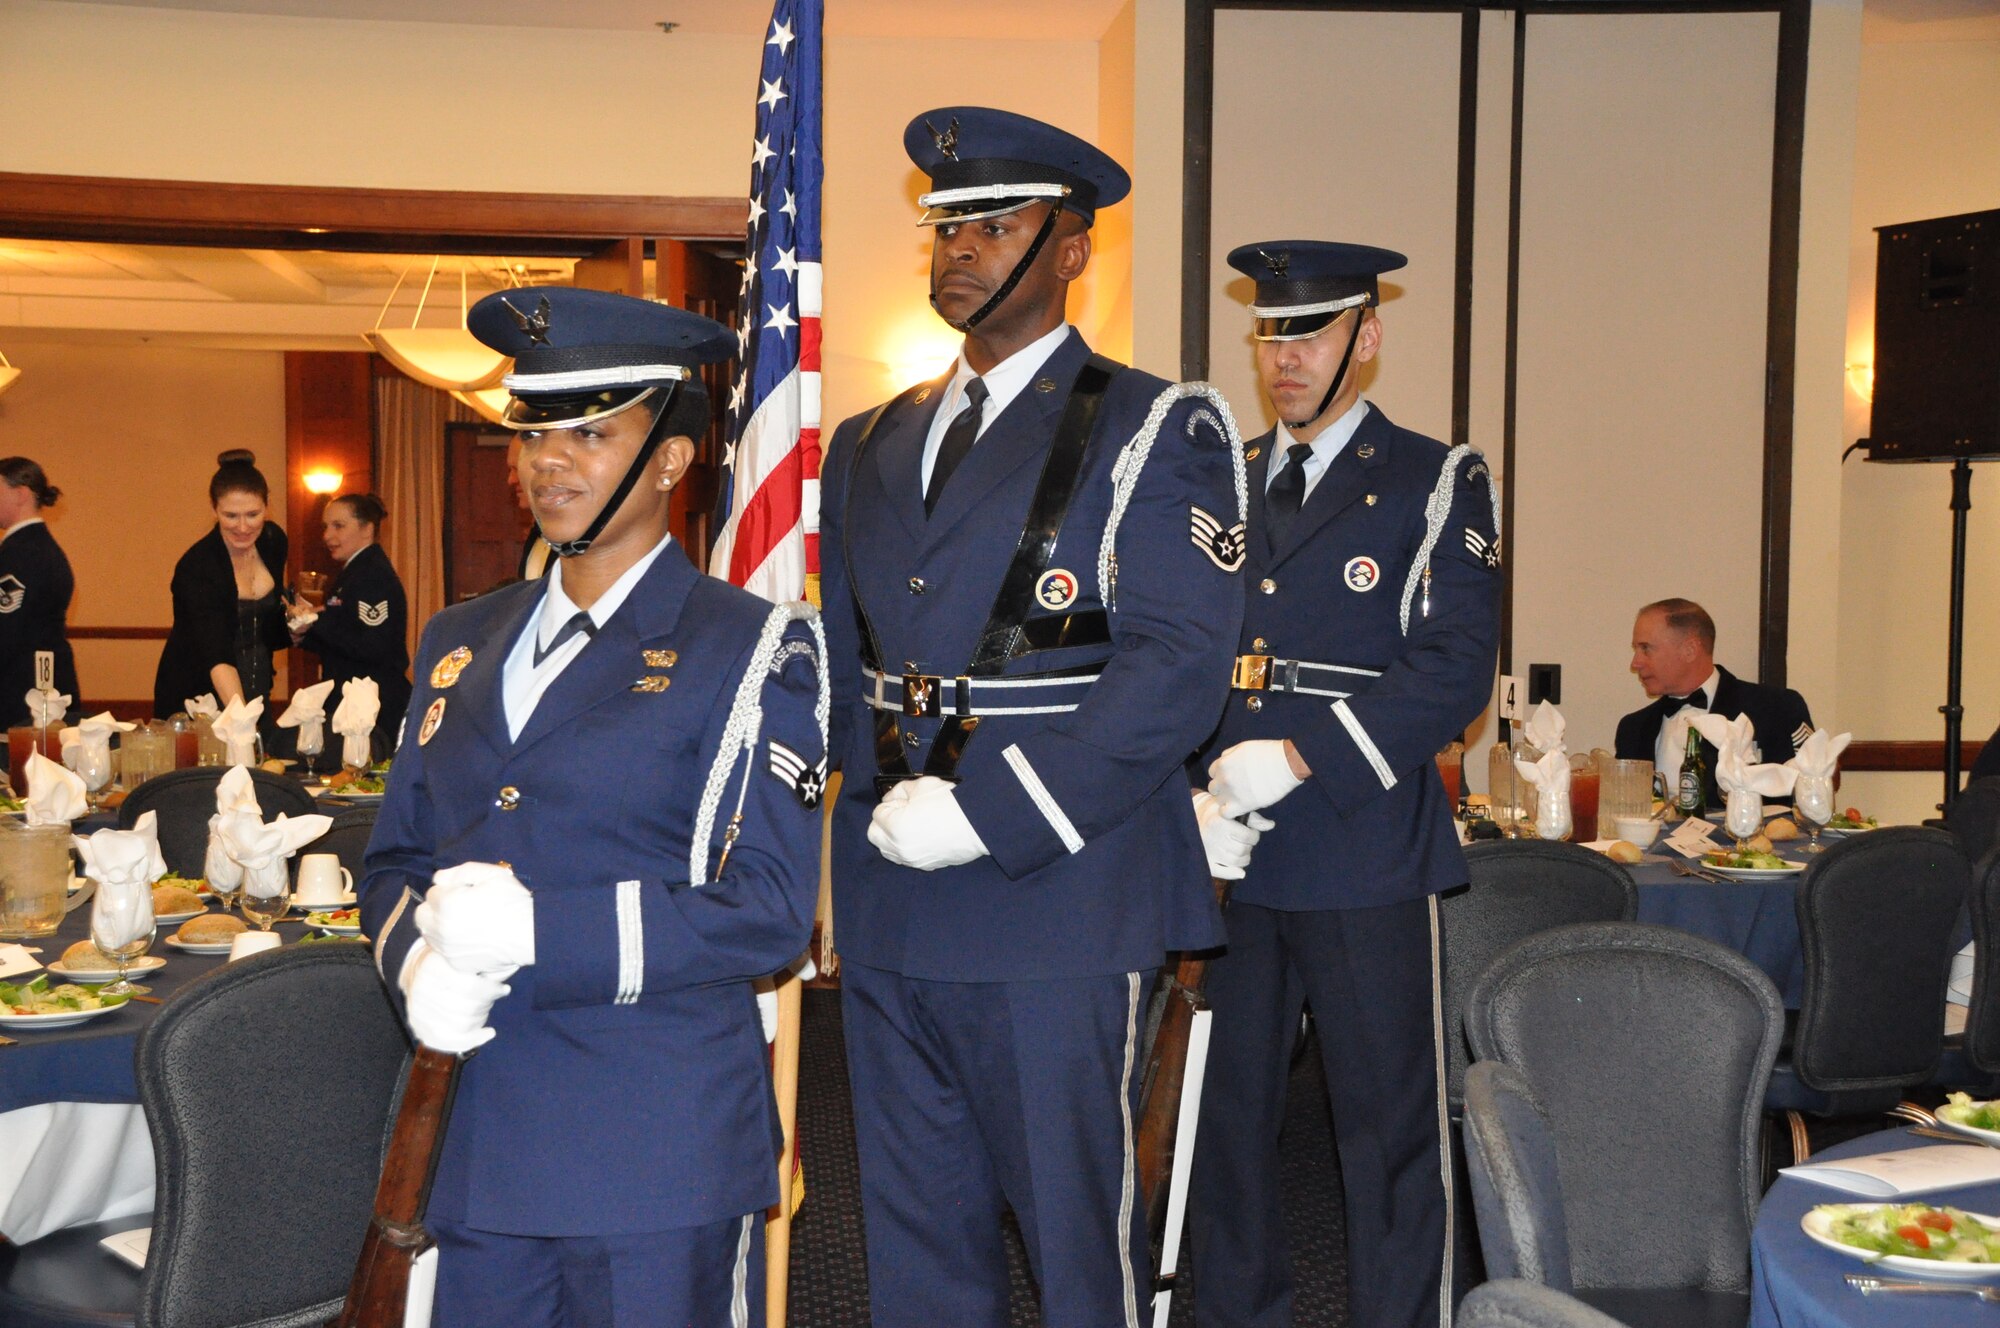 The 459th Air Refueling Wing Honor Guard prepares for opening ceremonies at the 459 ARW Annual Awards Banquet on Saturday, March 7, 2015. (Air Force Photo / SrA Kristin Kurtz)